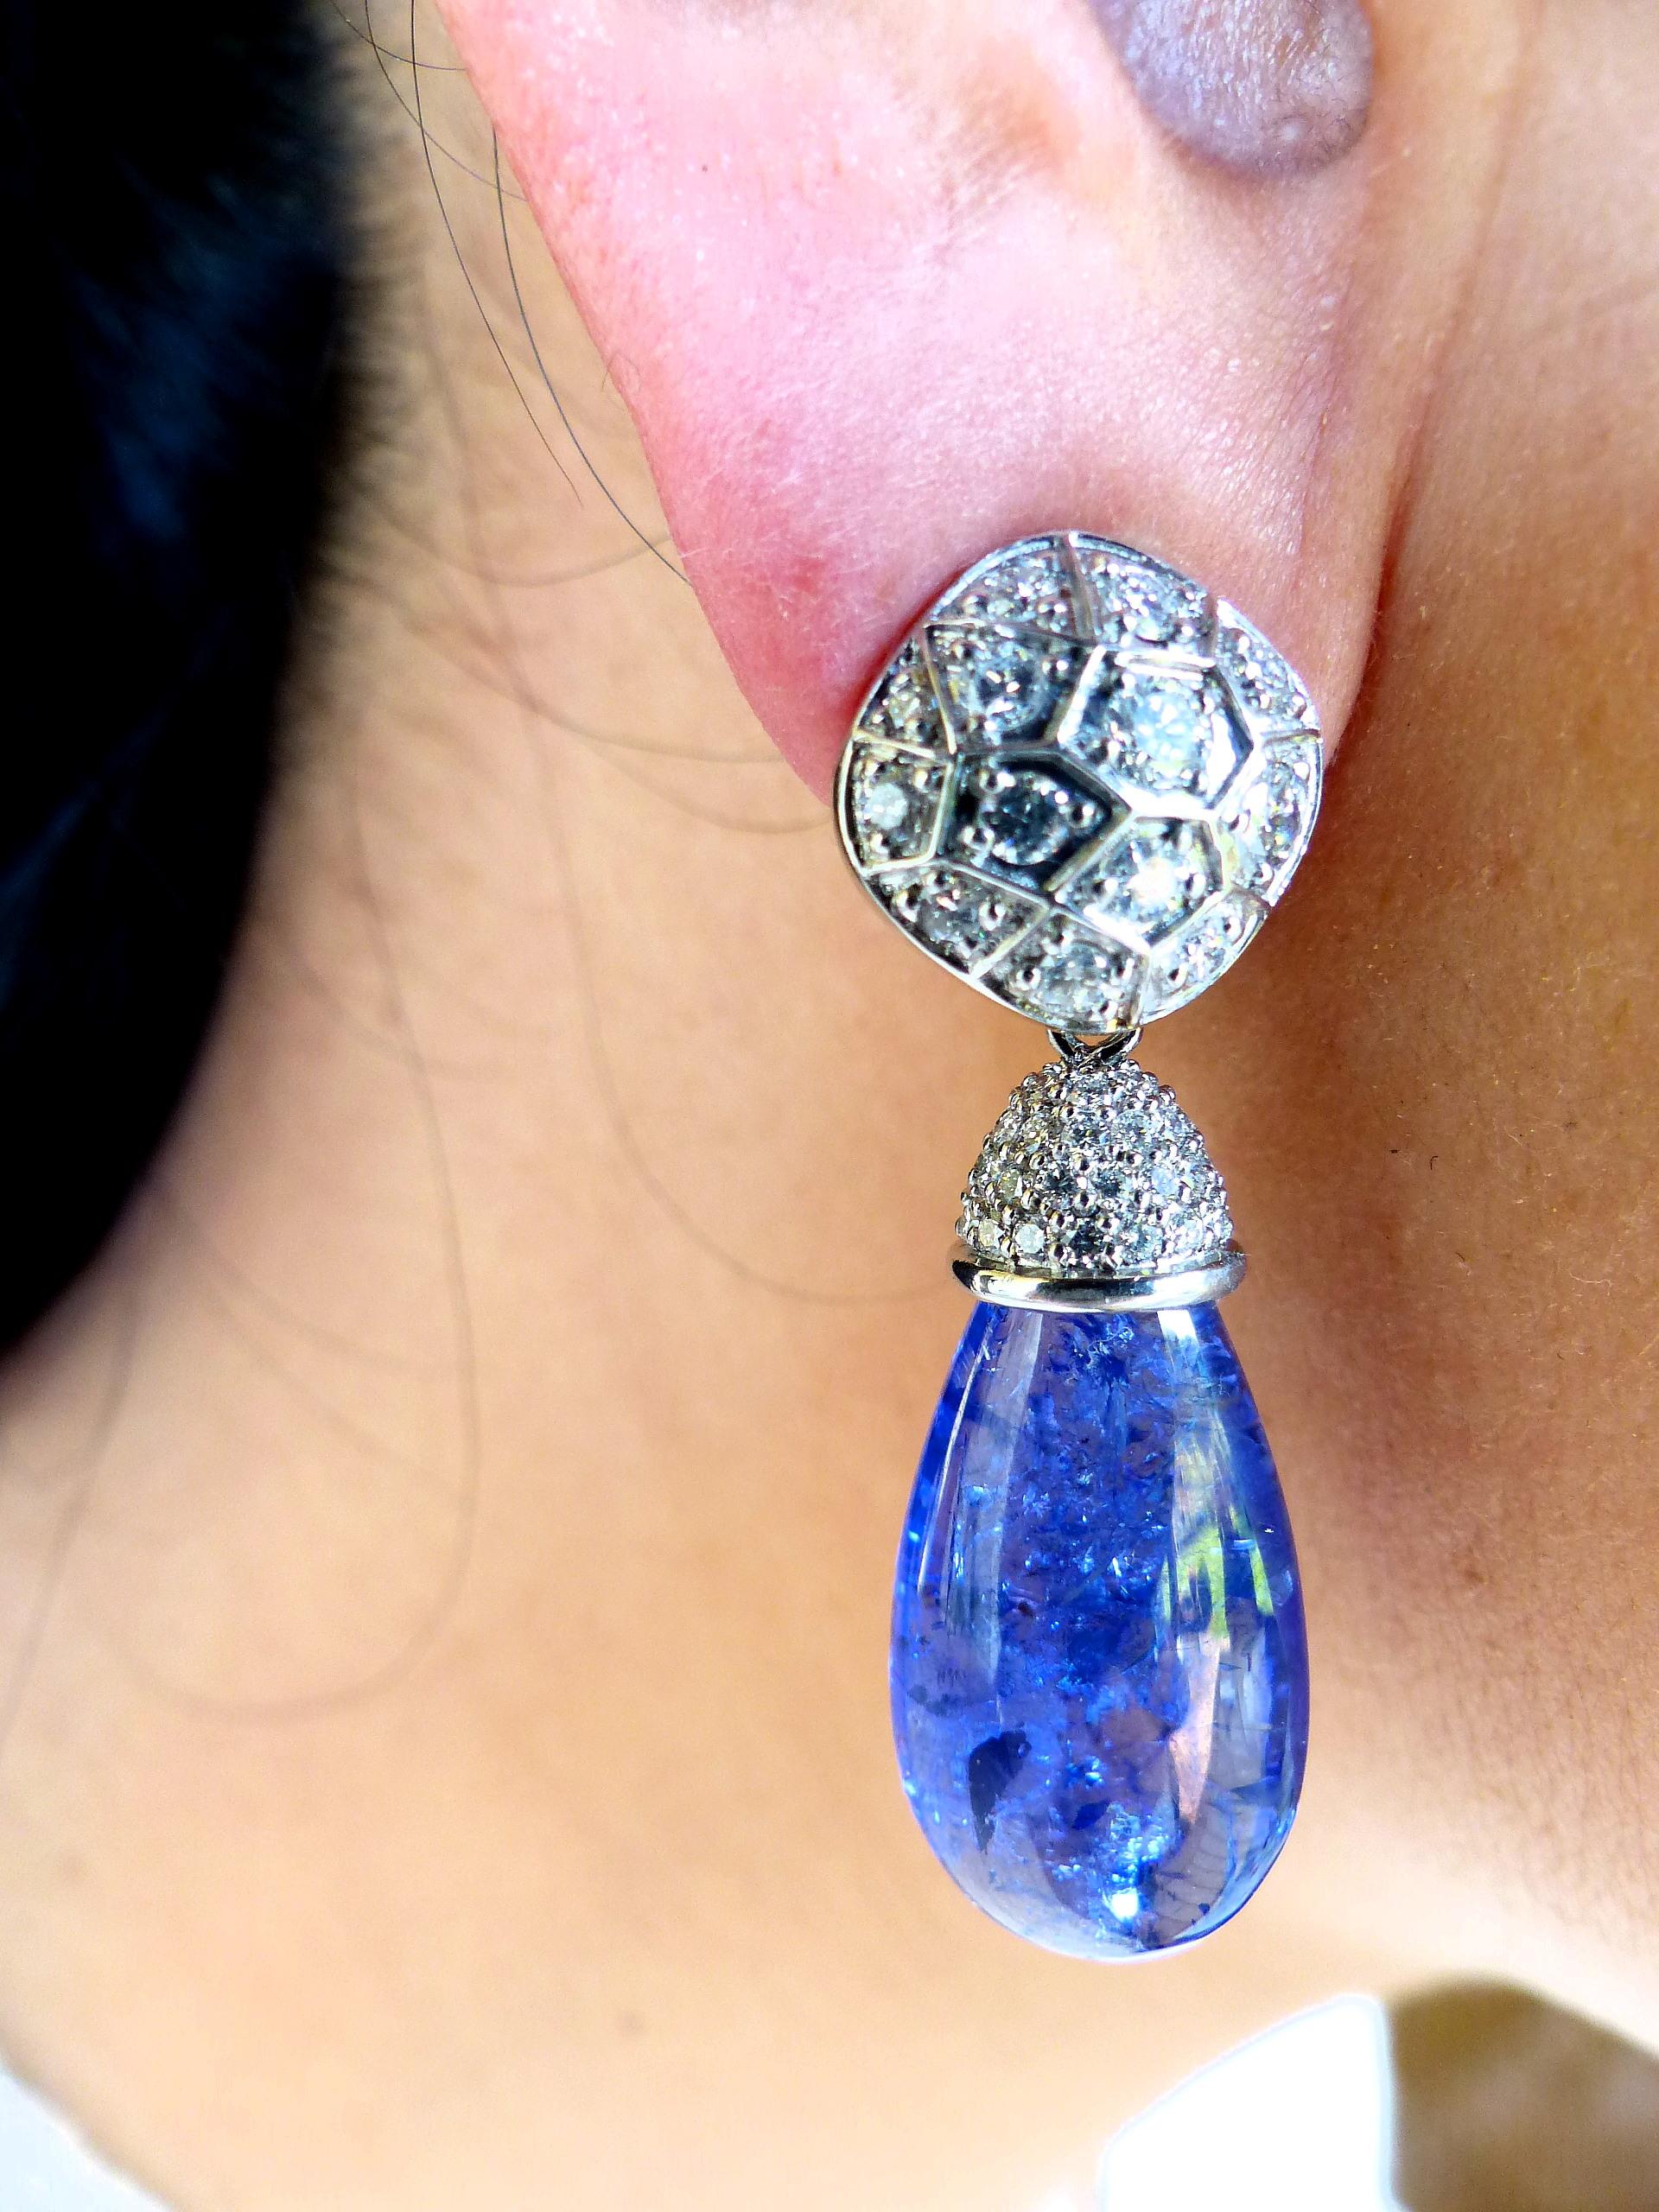 Women's Earrings in White Gold with 2 Tanzanite Brioletts 41, 11ct. and Diamonds. For Sale